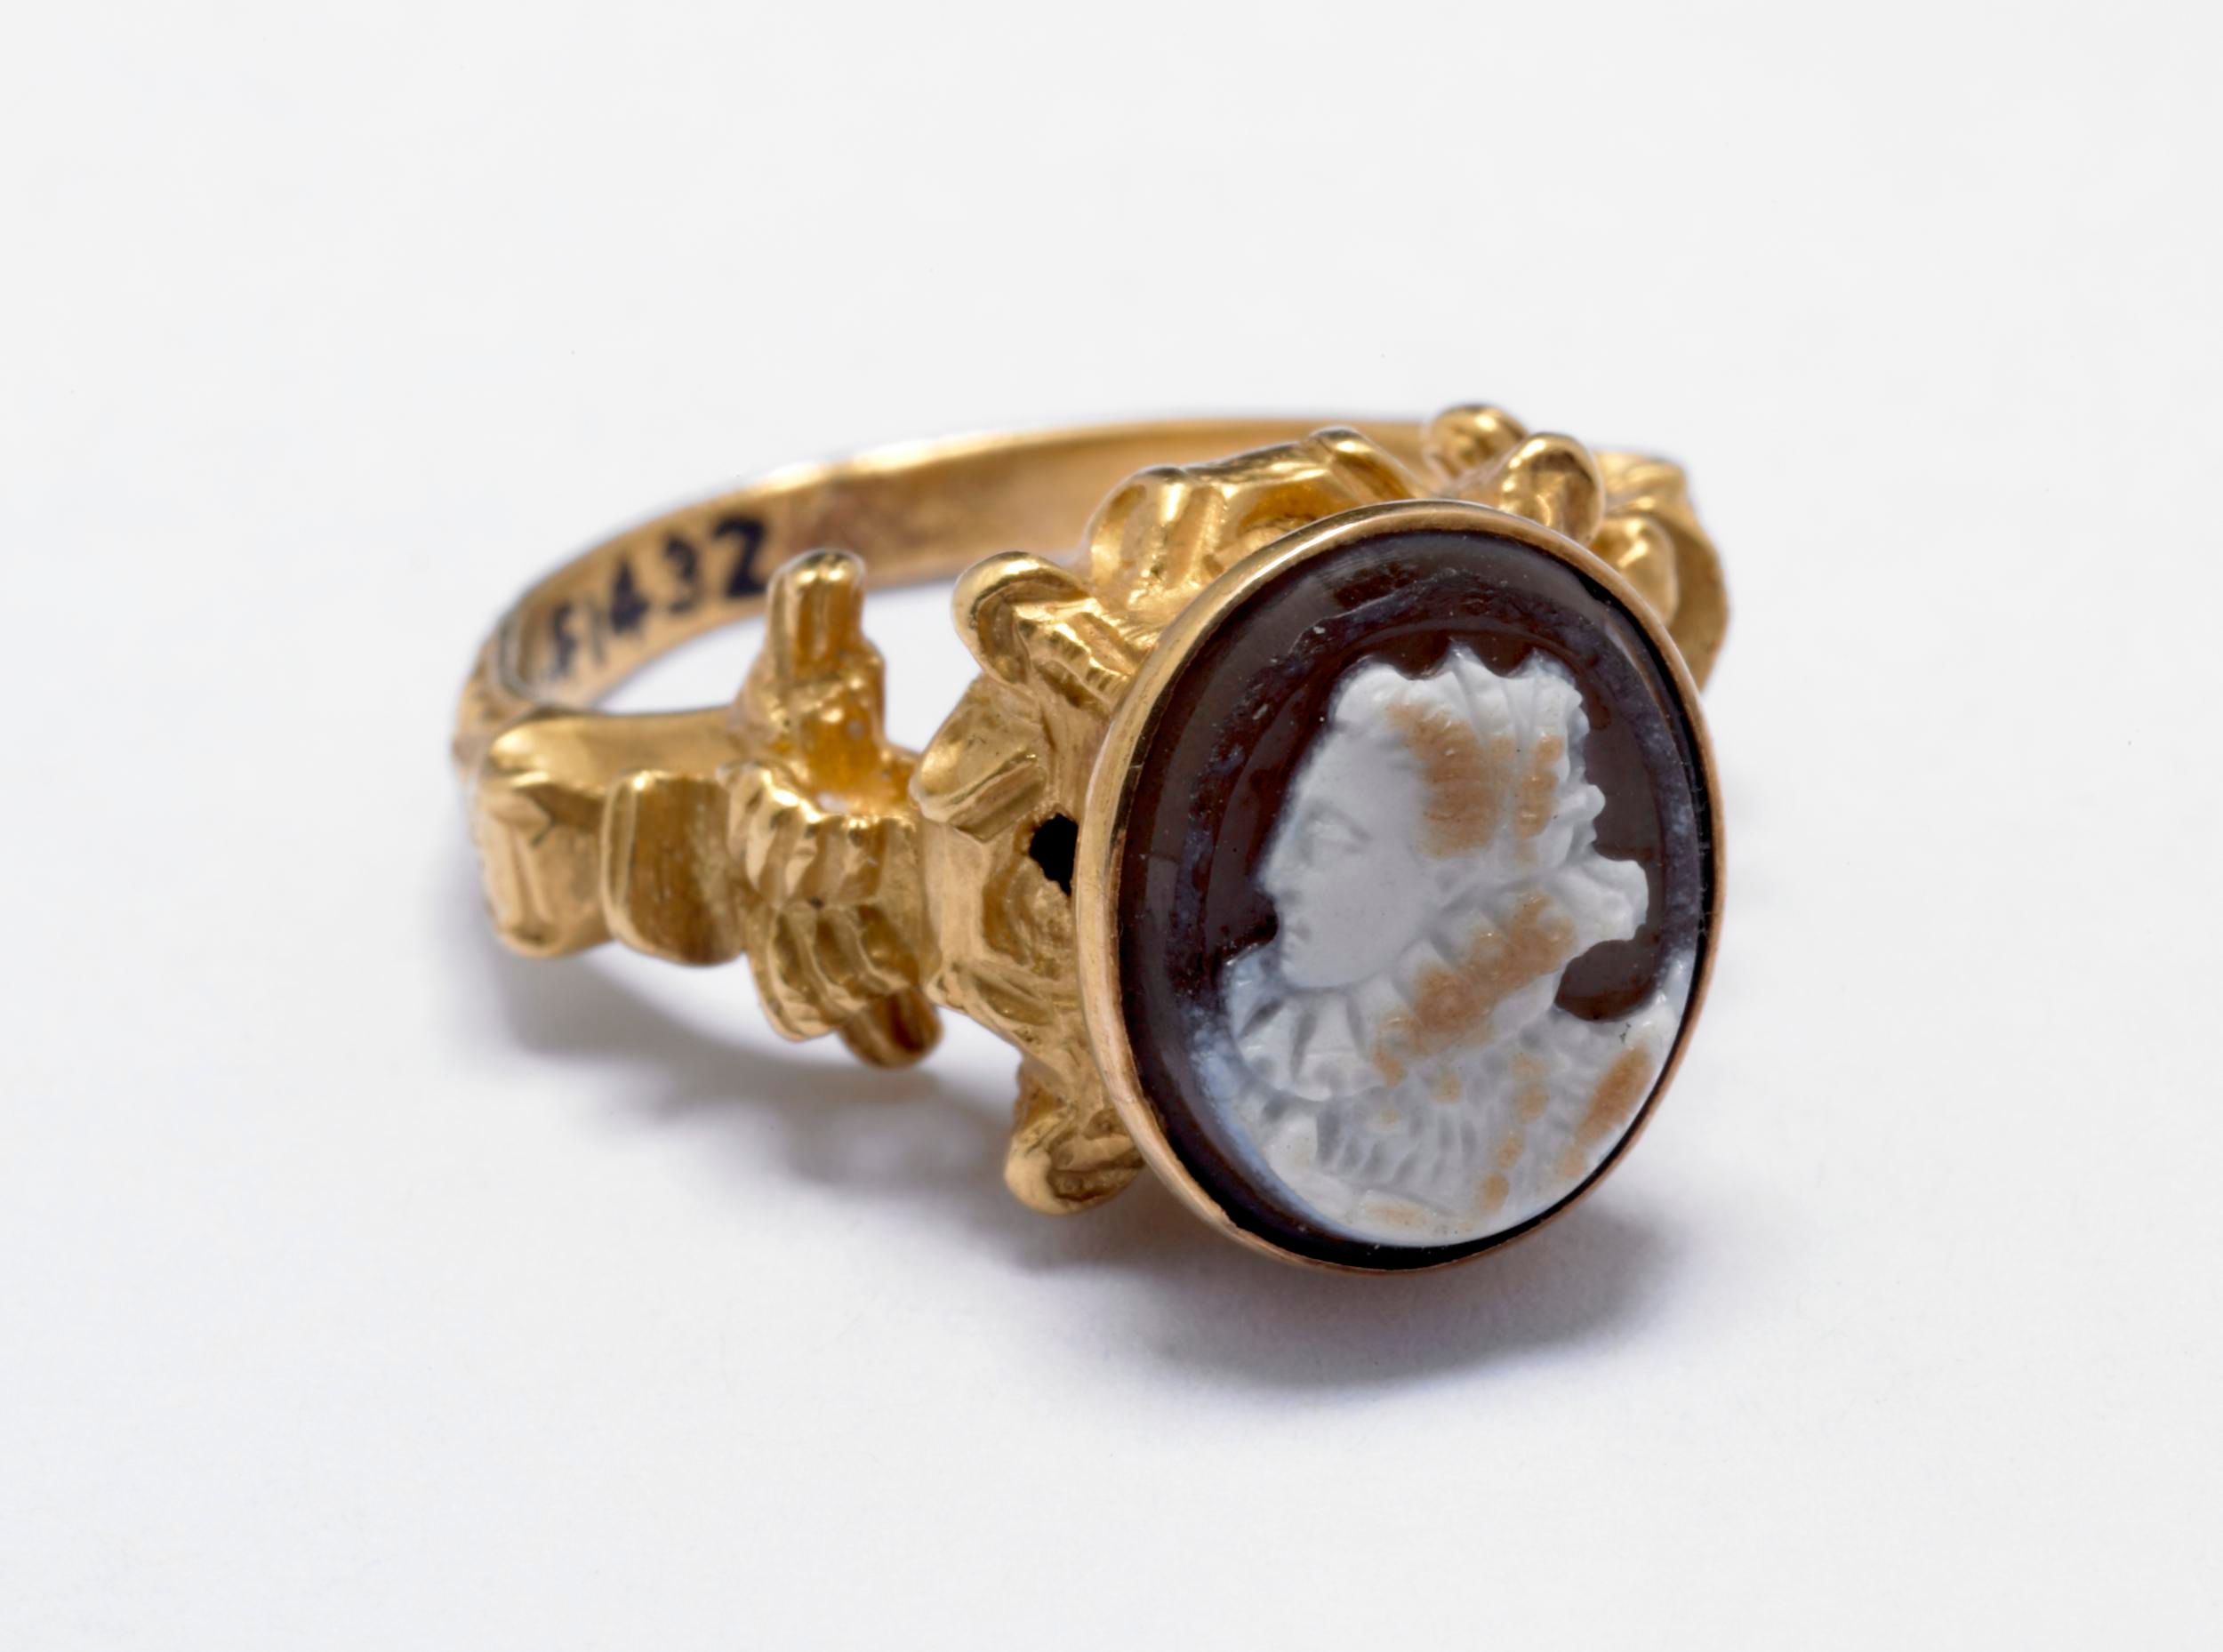 This is one of around 30 cameo portraits made between 1507-1603 and given as marks of royal favor and worn as symbols of allegiance. Ring with the portrait of Queen Elizabeth I carved in onyx, 1575-1600. The British Museum. 